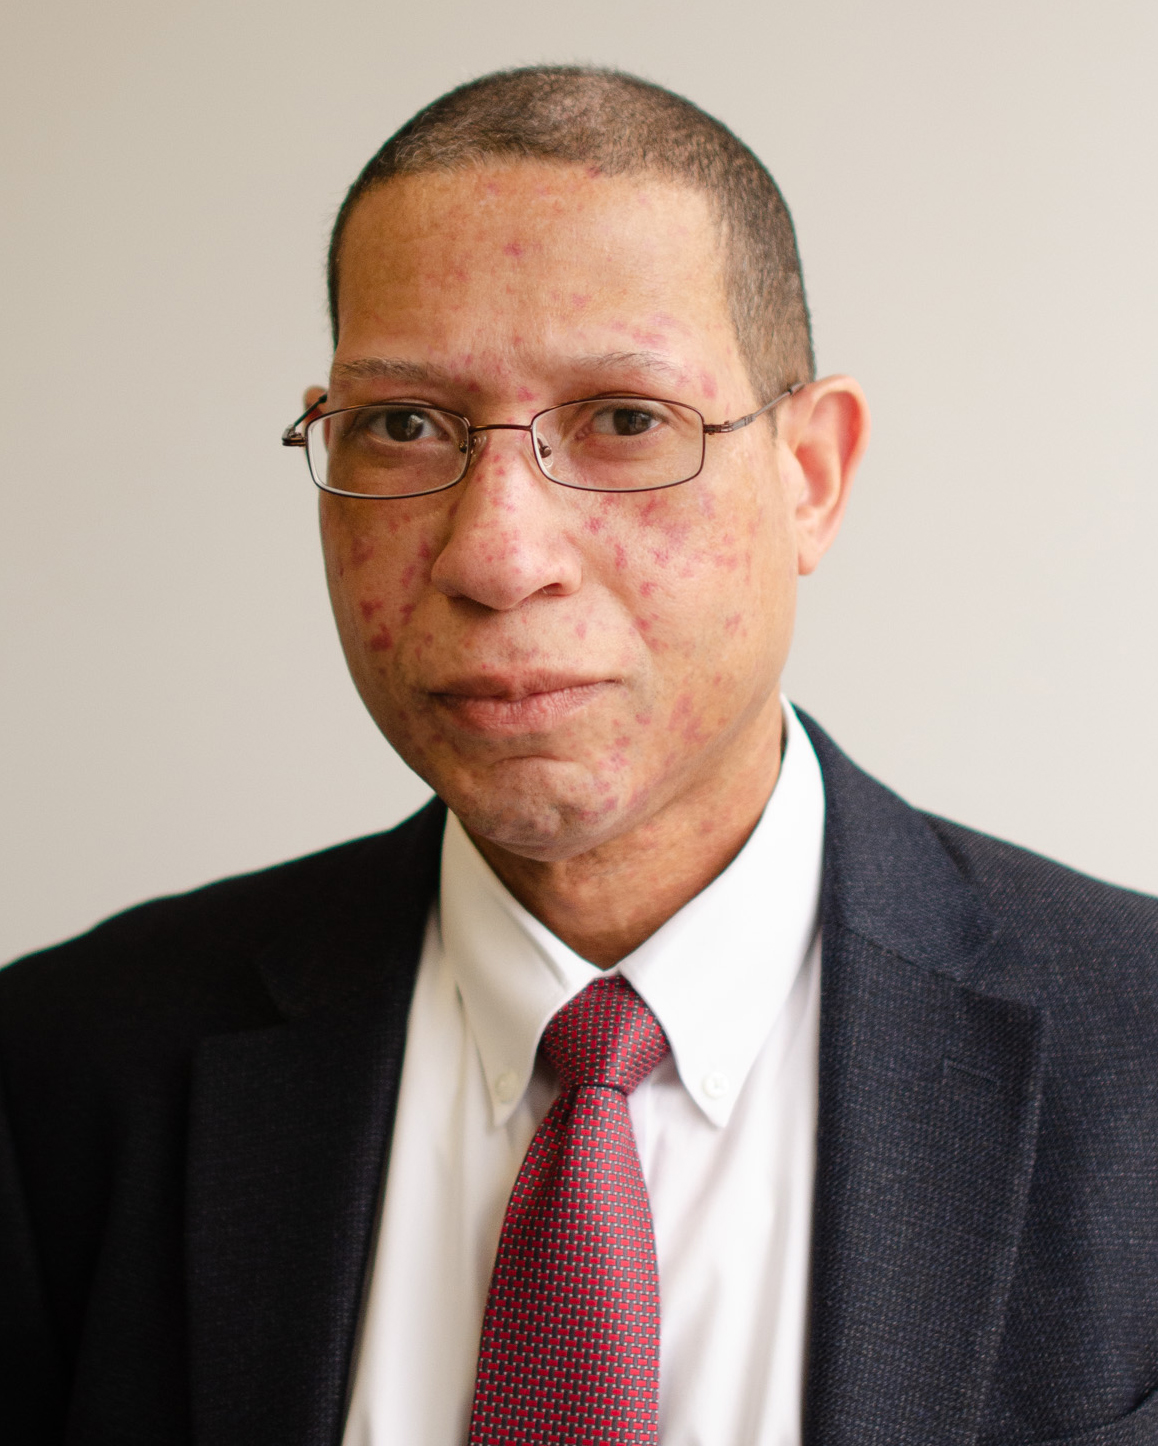 Maurice Dobson, Deputy Commissioner for Legal Affairs